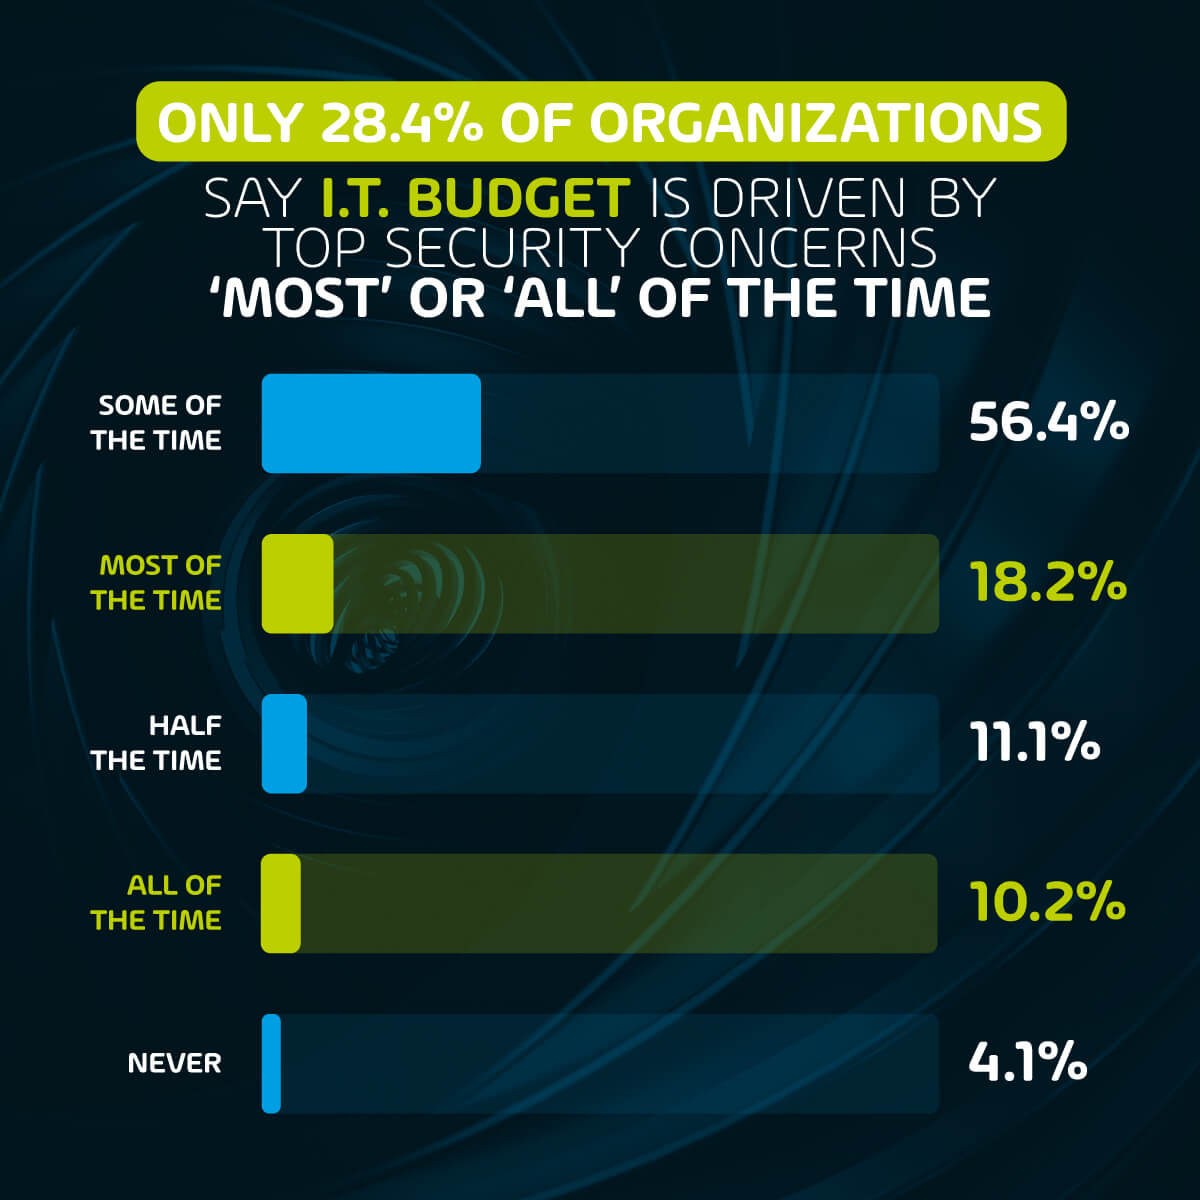 Only 28.4% of organizations say IT spend is driven by top security concerns ‘most’ or ‘all’ of the time